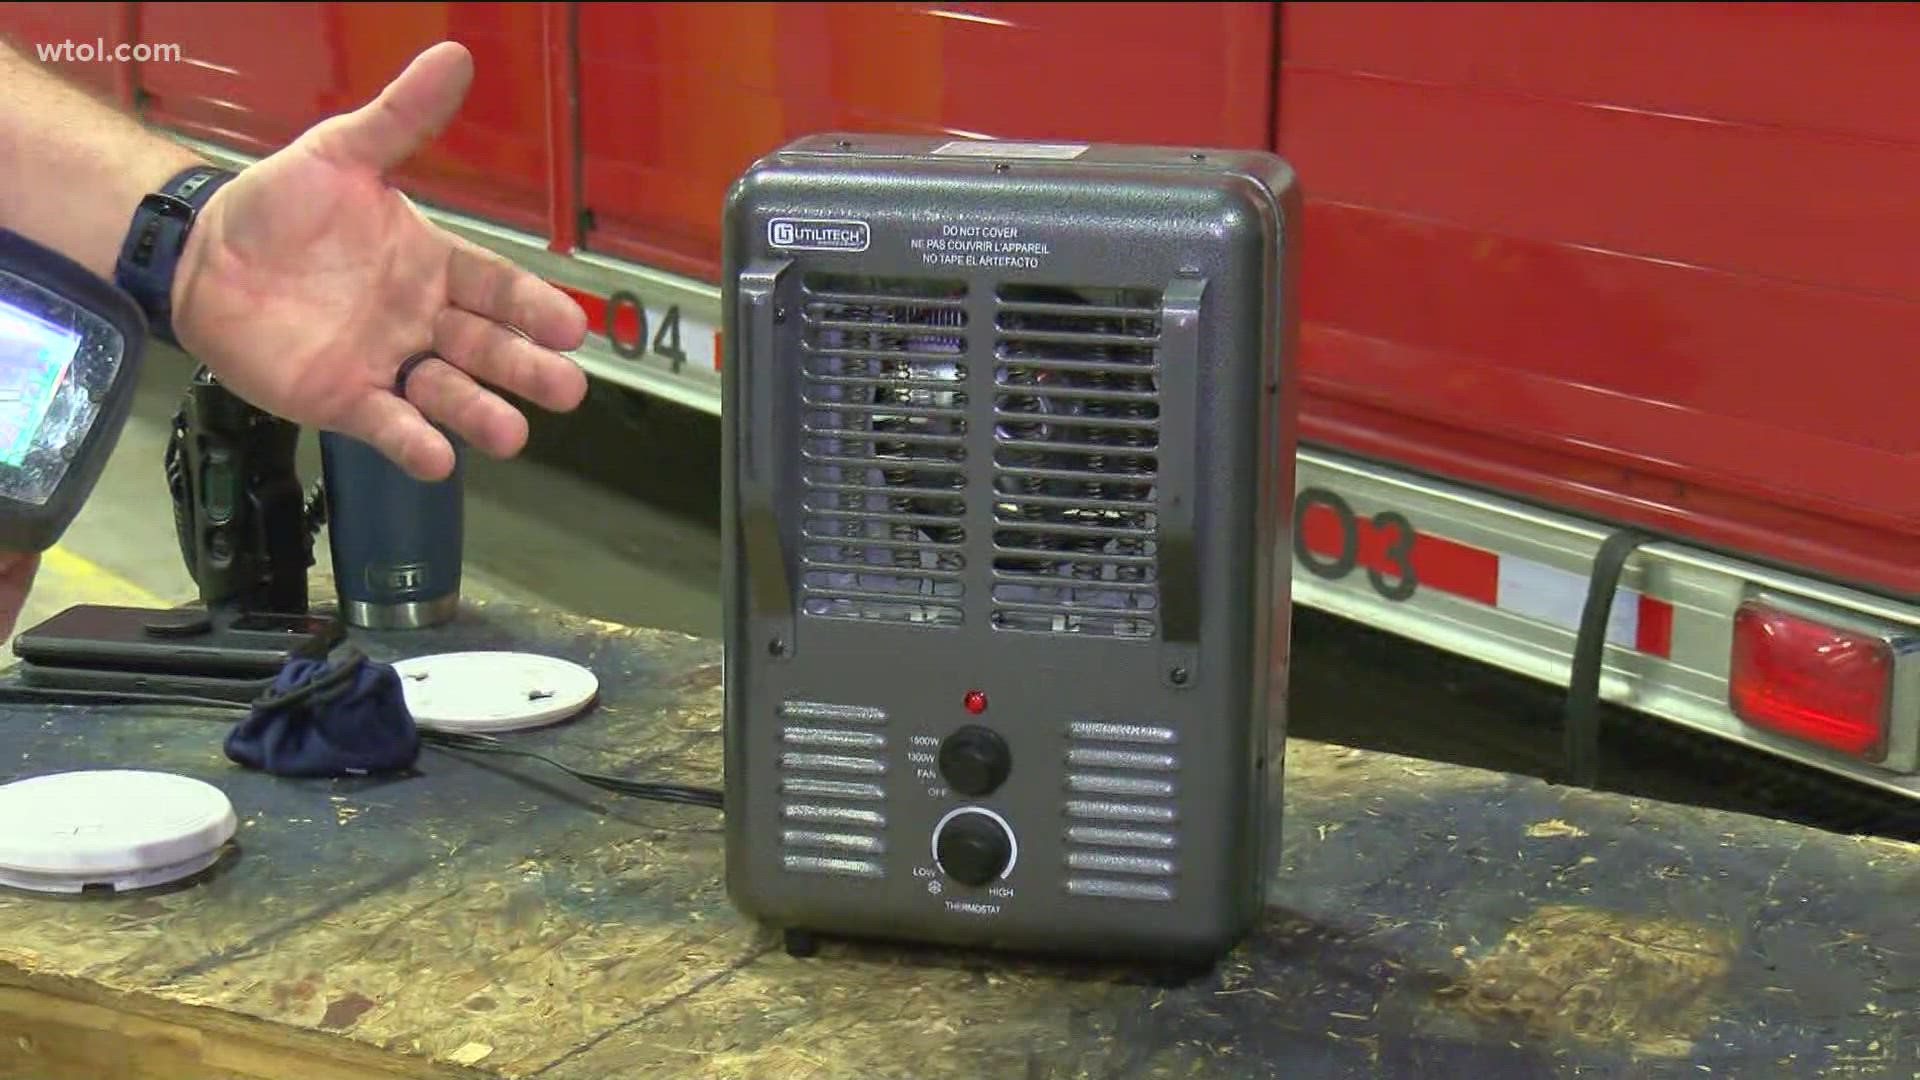 The Toledo Fire department shows us the importance of smoke detectors, and how to use space heaters with proper safety precautions.